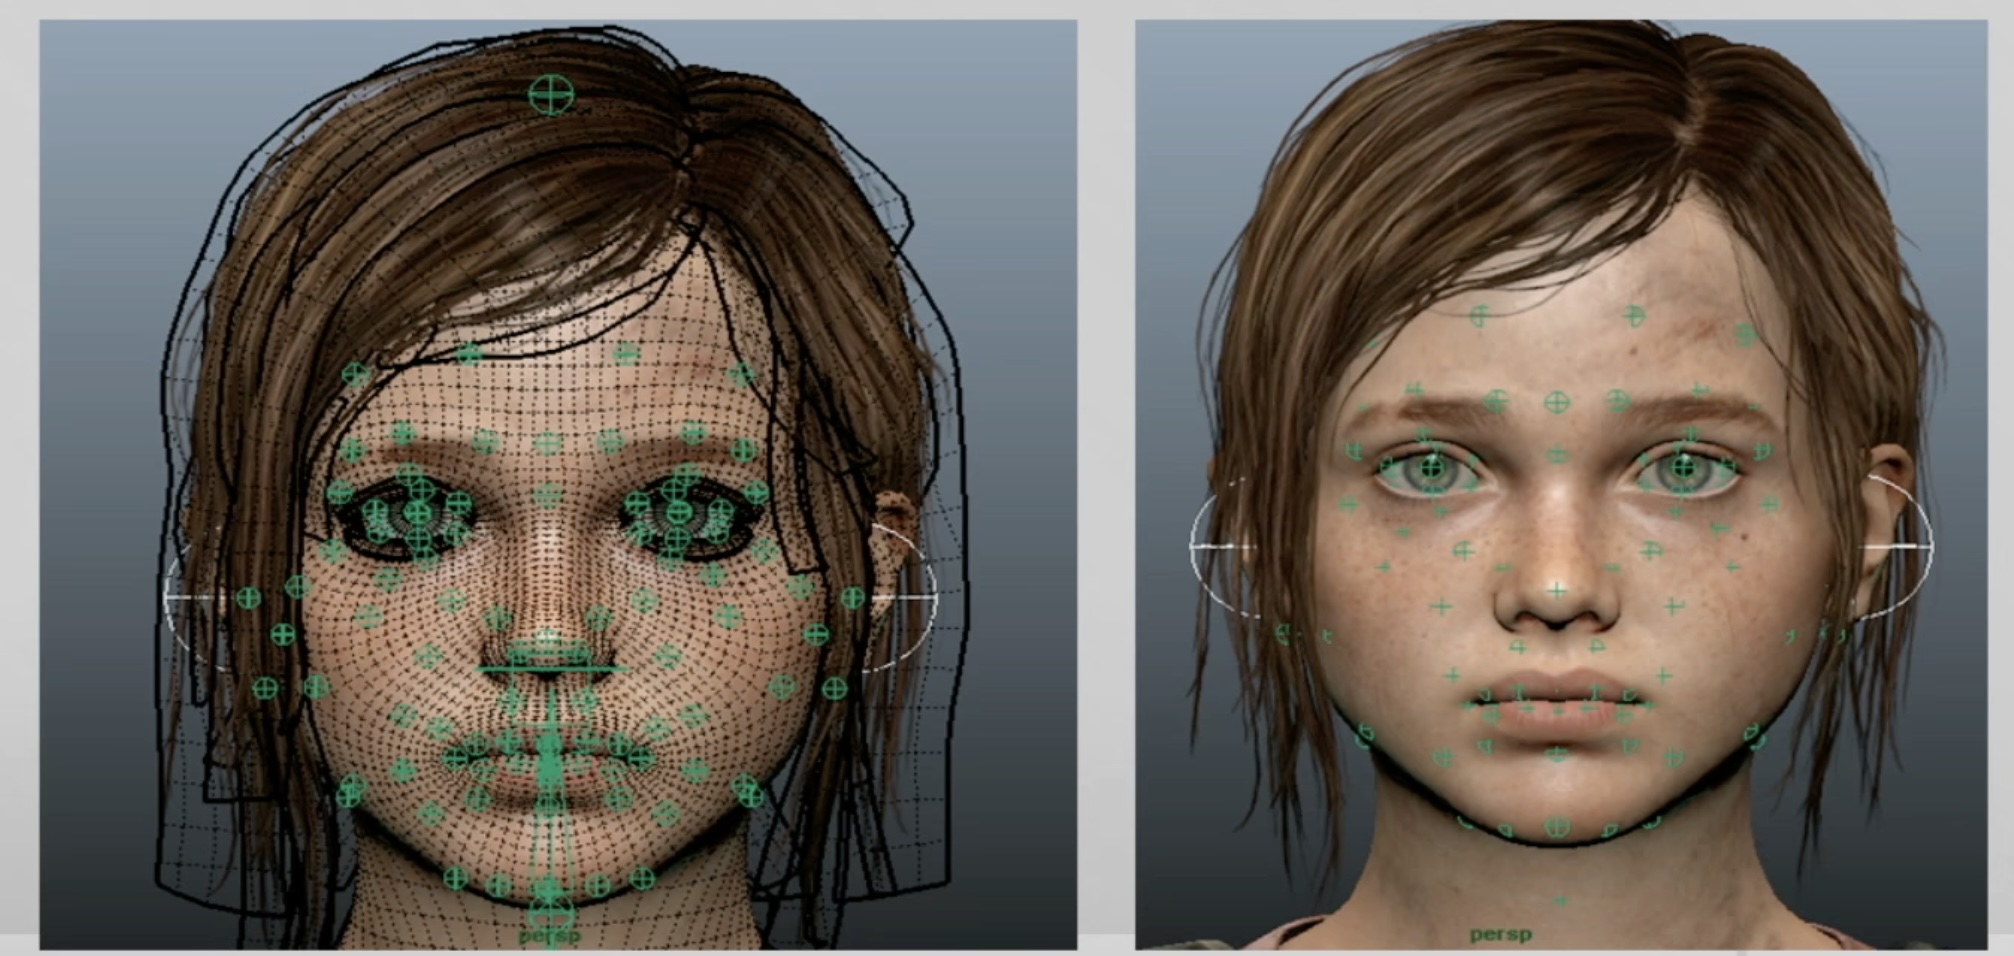 The Last of Us like most AAA games targets realism with a full face rig